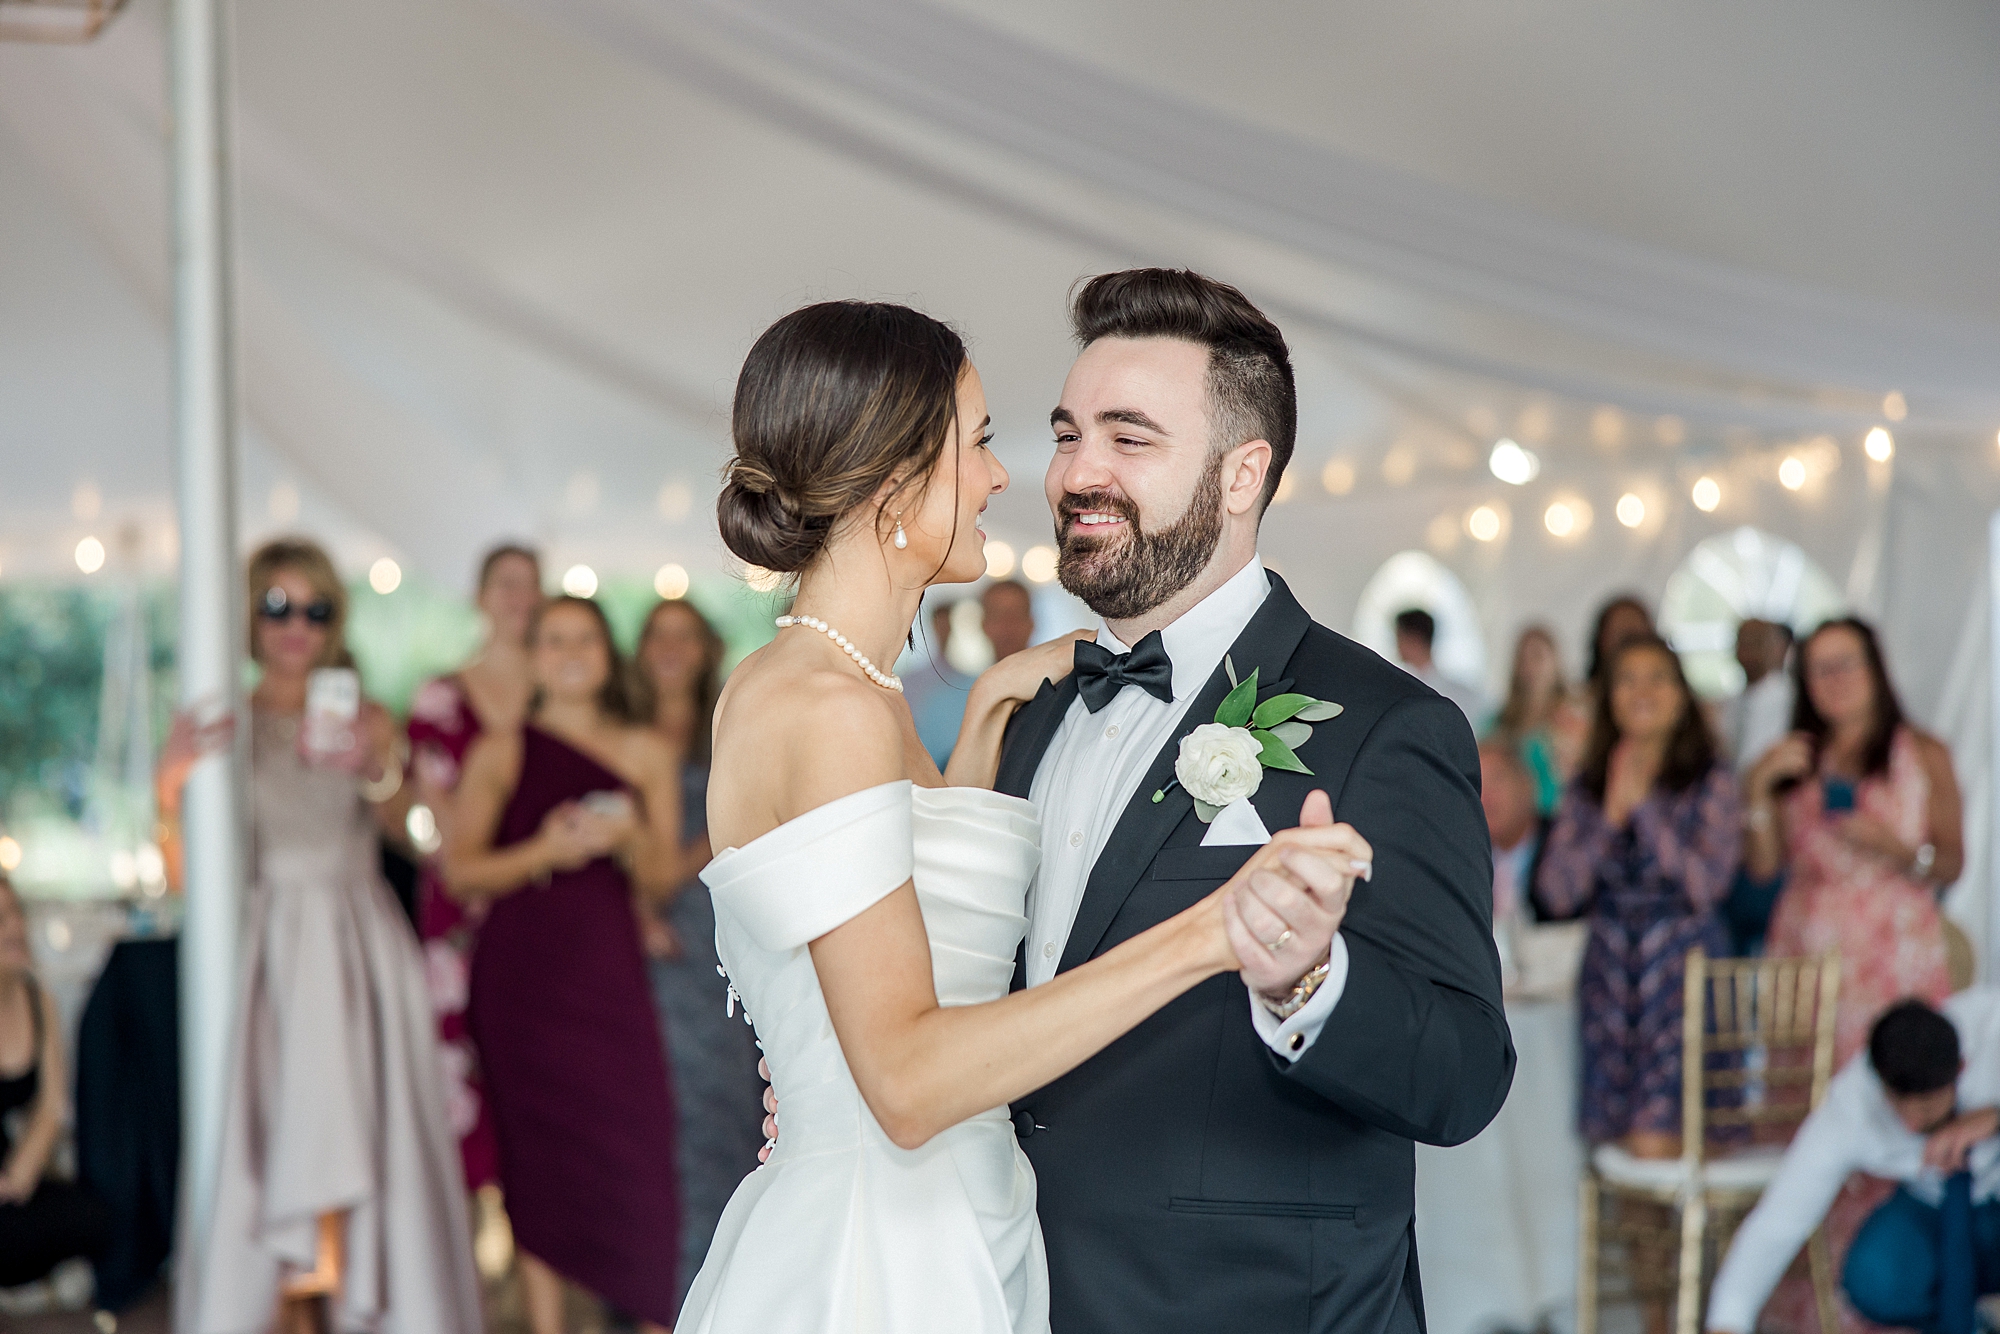 couple dance together at reception